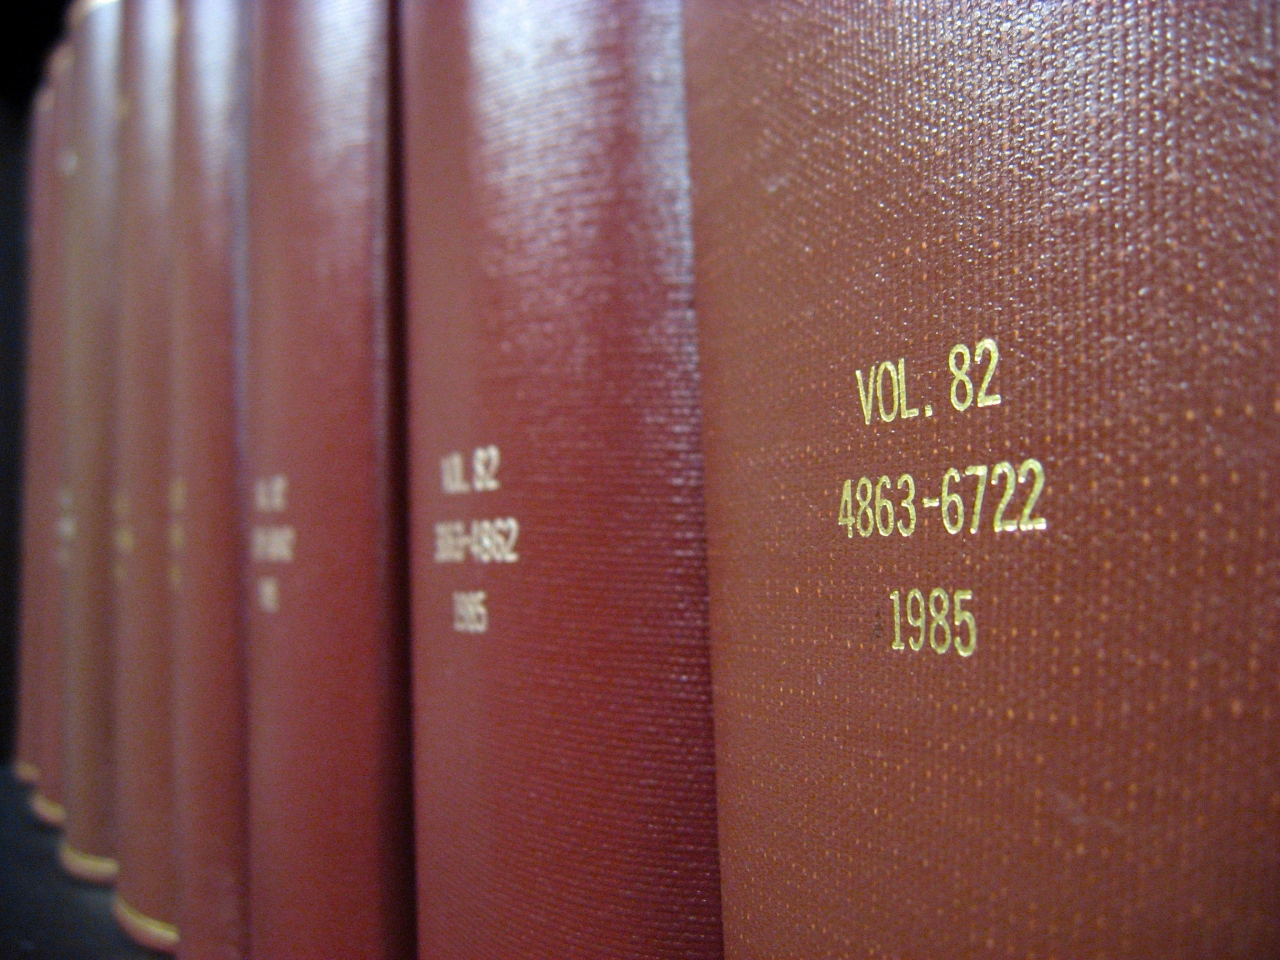 Volume 82 of materials in the research library.